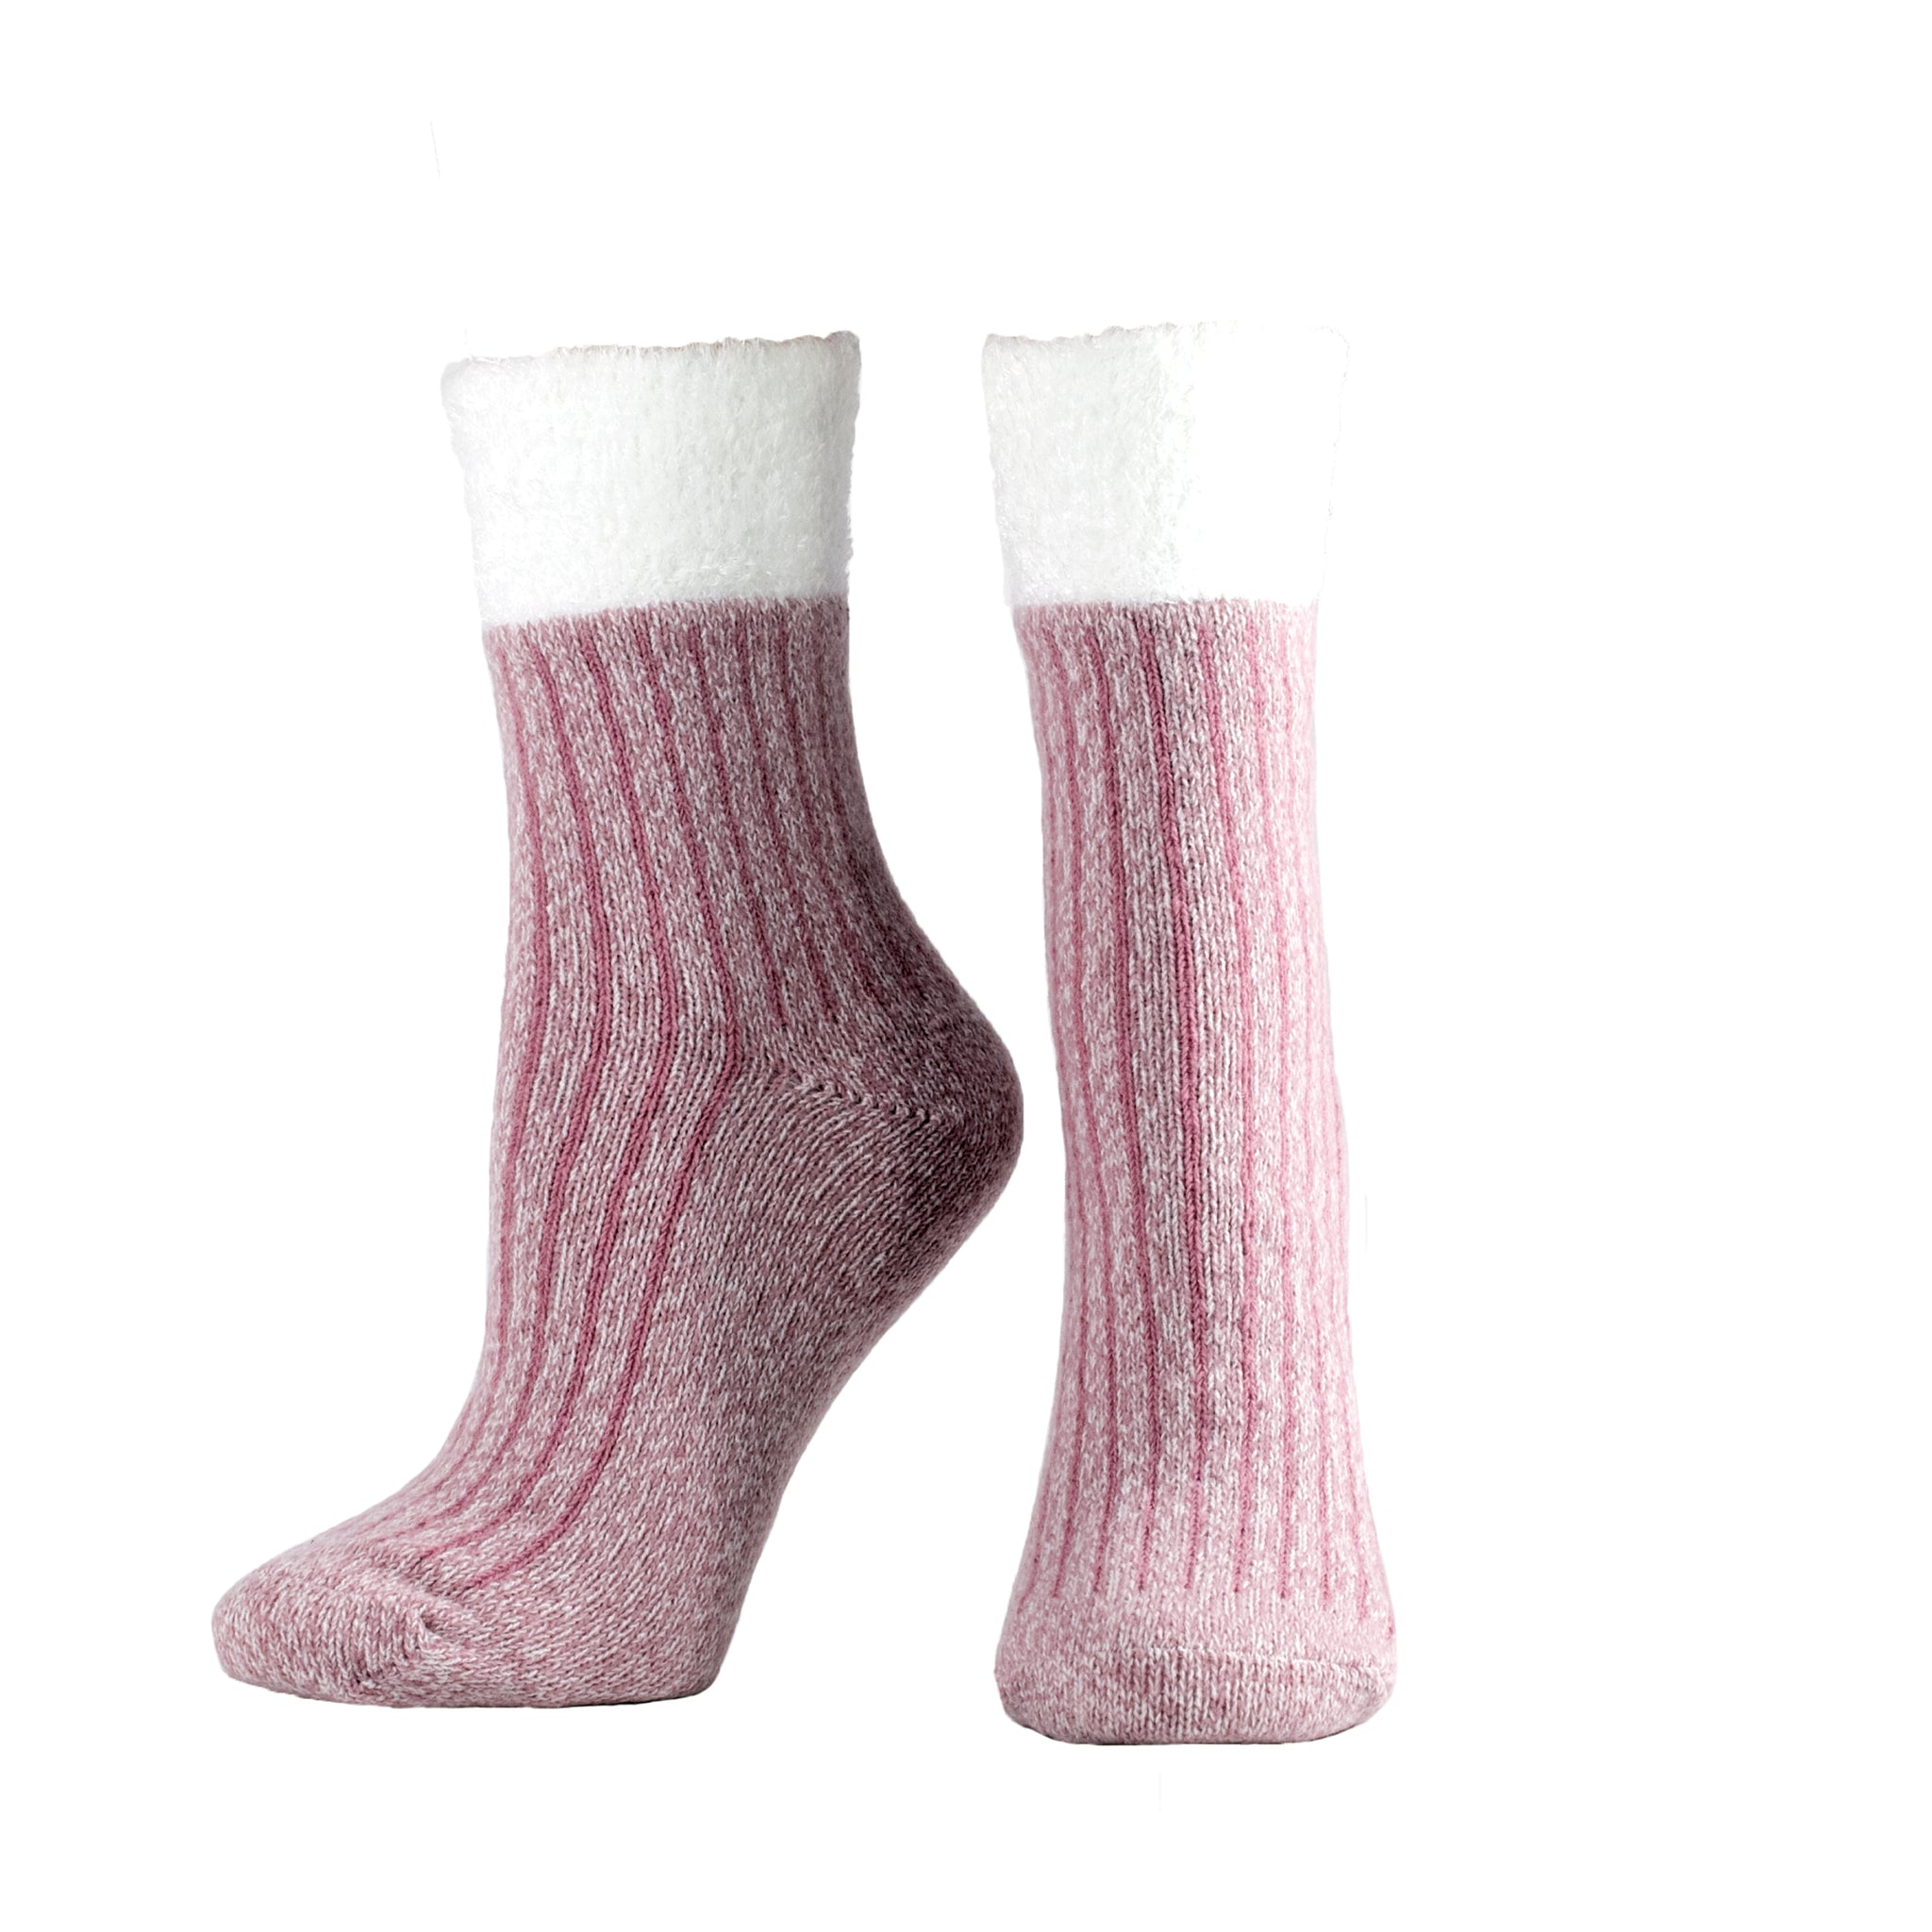 Double Layer Corduroy Non-Skid Warm Soft and Fuzzy Lavender and Shea Butter Infused Slipper Socks